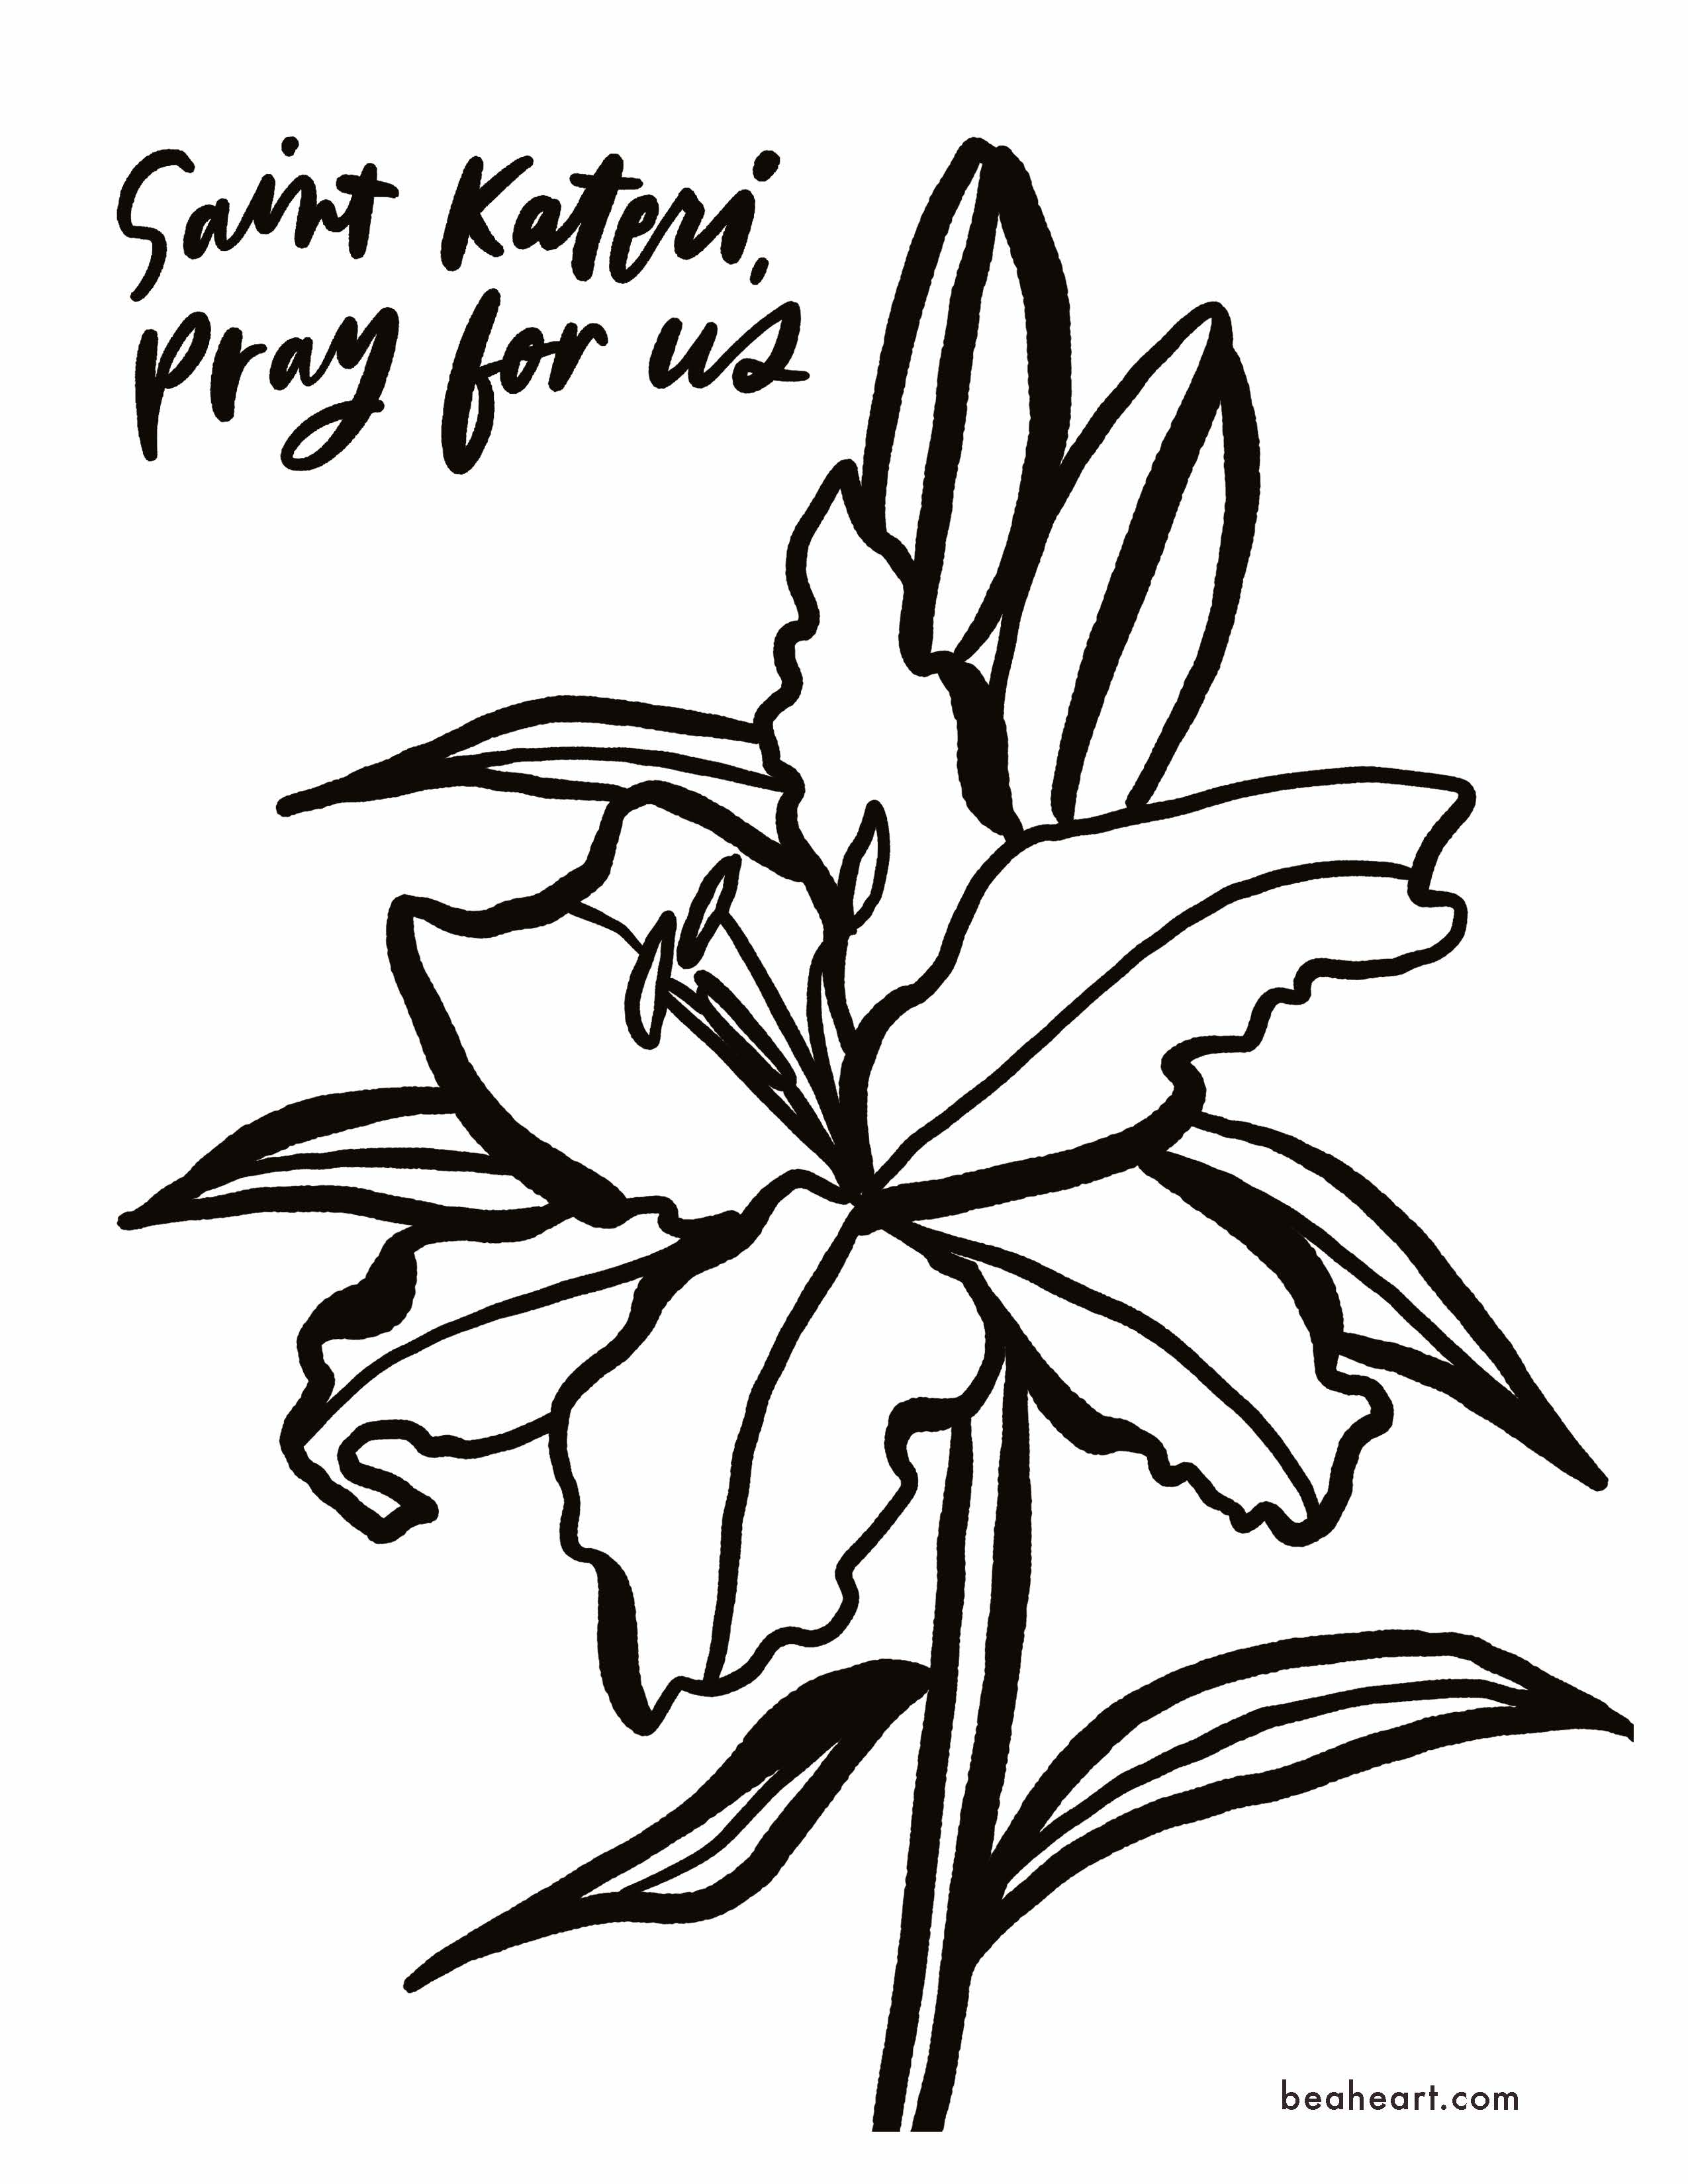 Free st kateris lily coloring page â be a heart